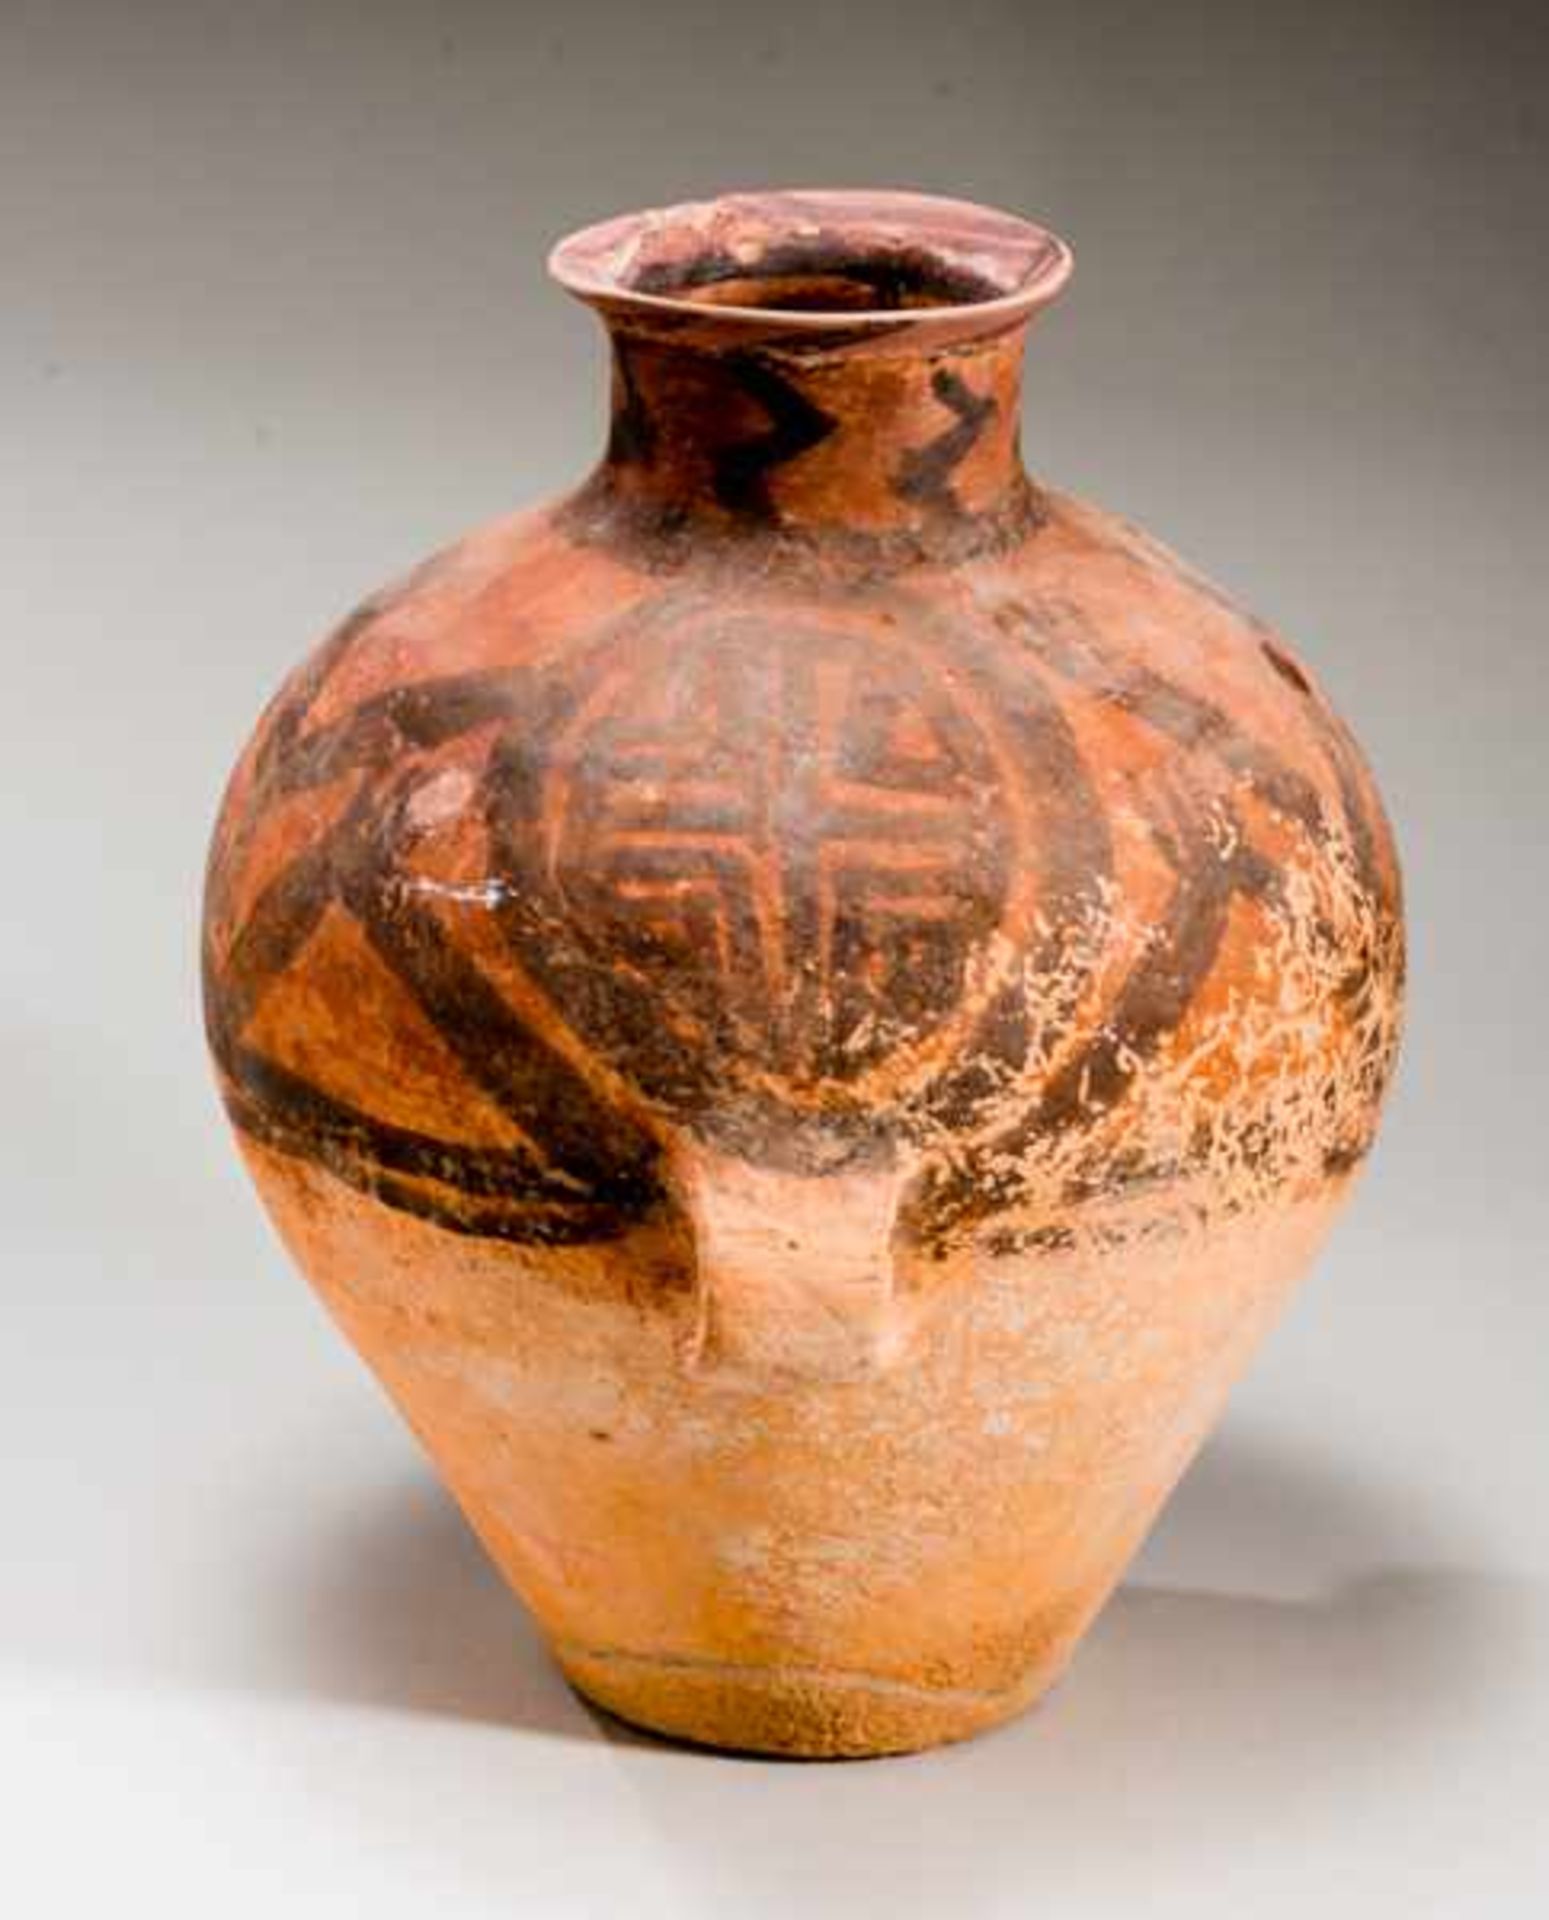 LARGE VESSEL Terracotta with the original painting. China, Yangshao culture (3000-2000BCE) Majiayao, - Image 3 of 6